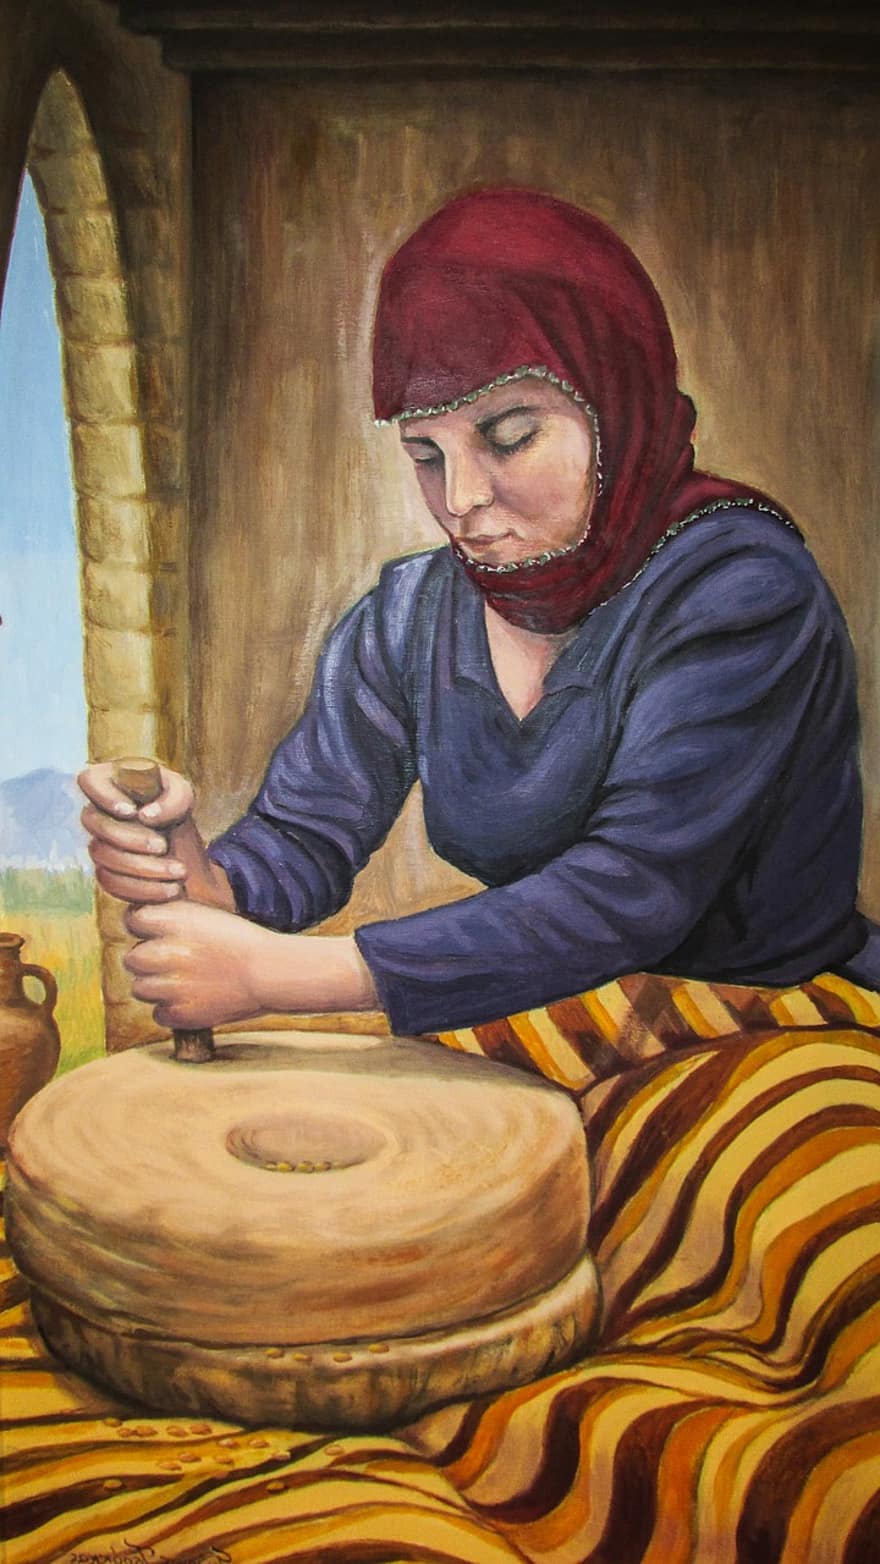 Cyprus, Bakery, Grind Wheat, Traditional, Painting, Bread, Food, Wheat, Dherynia, Folklore Museum